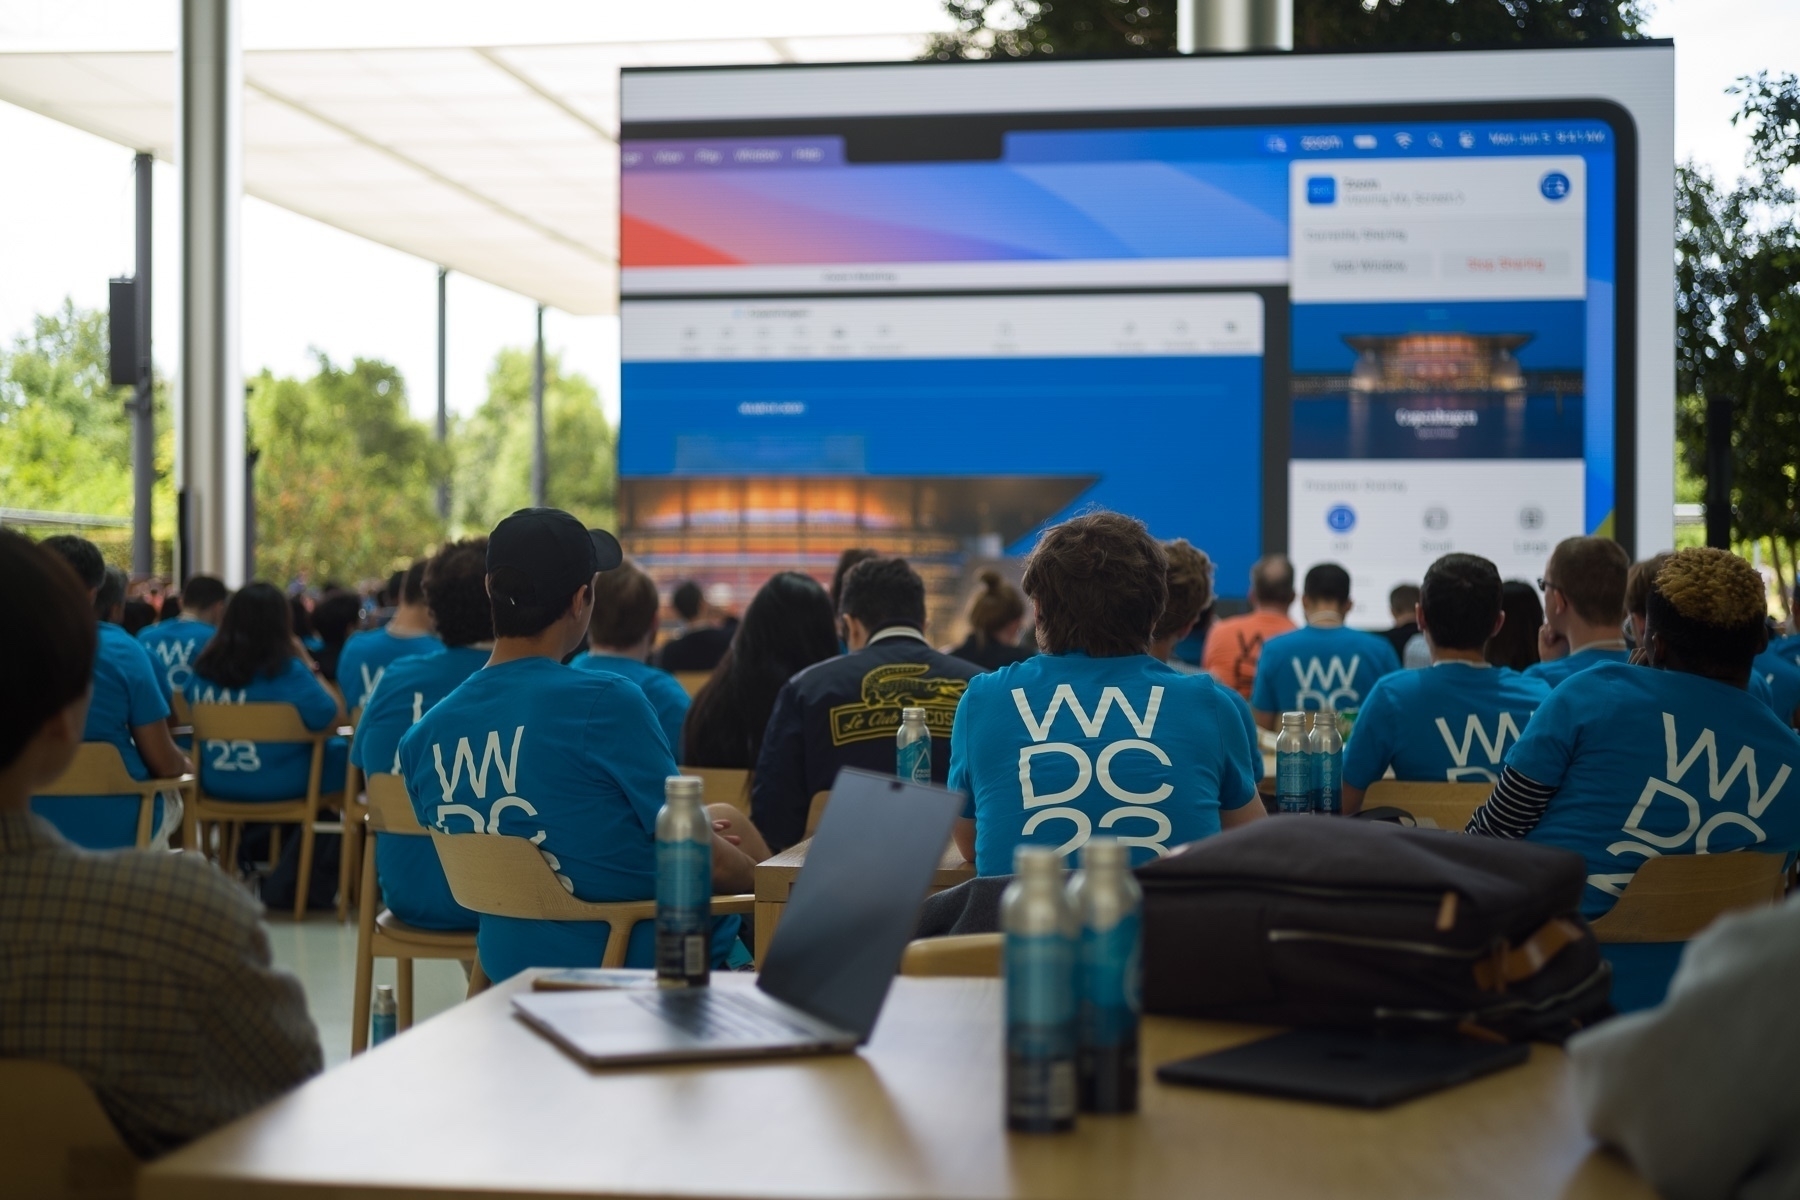 A number of people in blue T-shirts with WWDC23 written on their backs are watching a screen with a video playing.